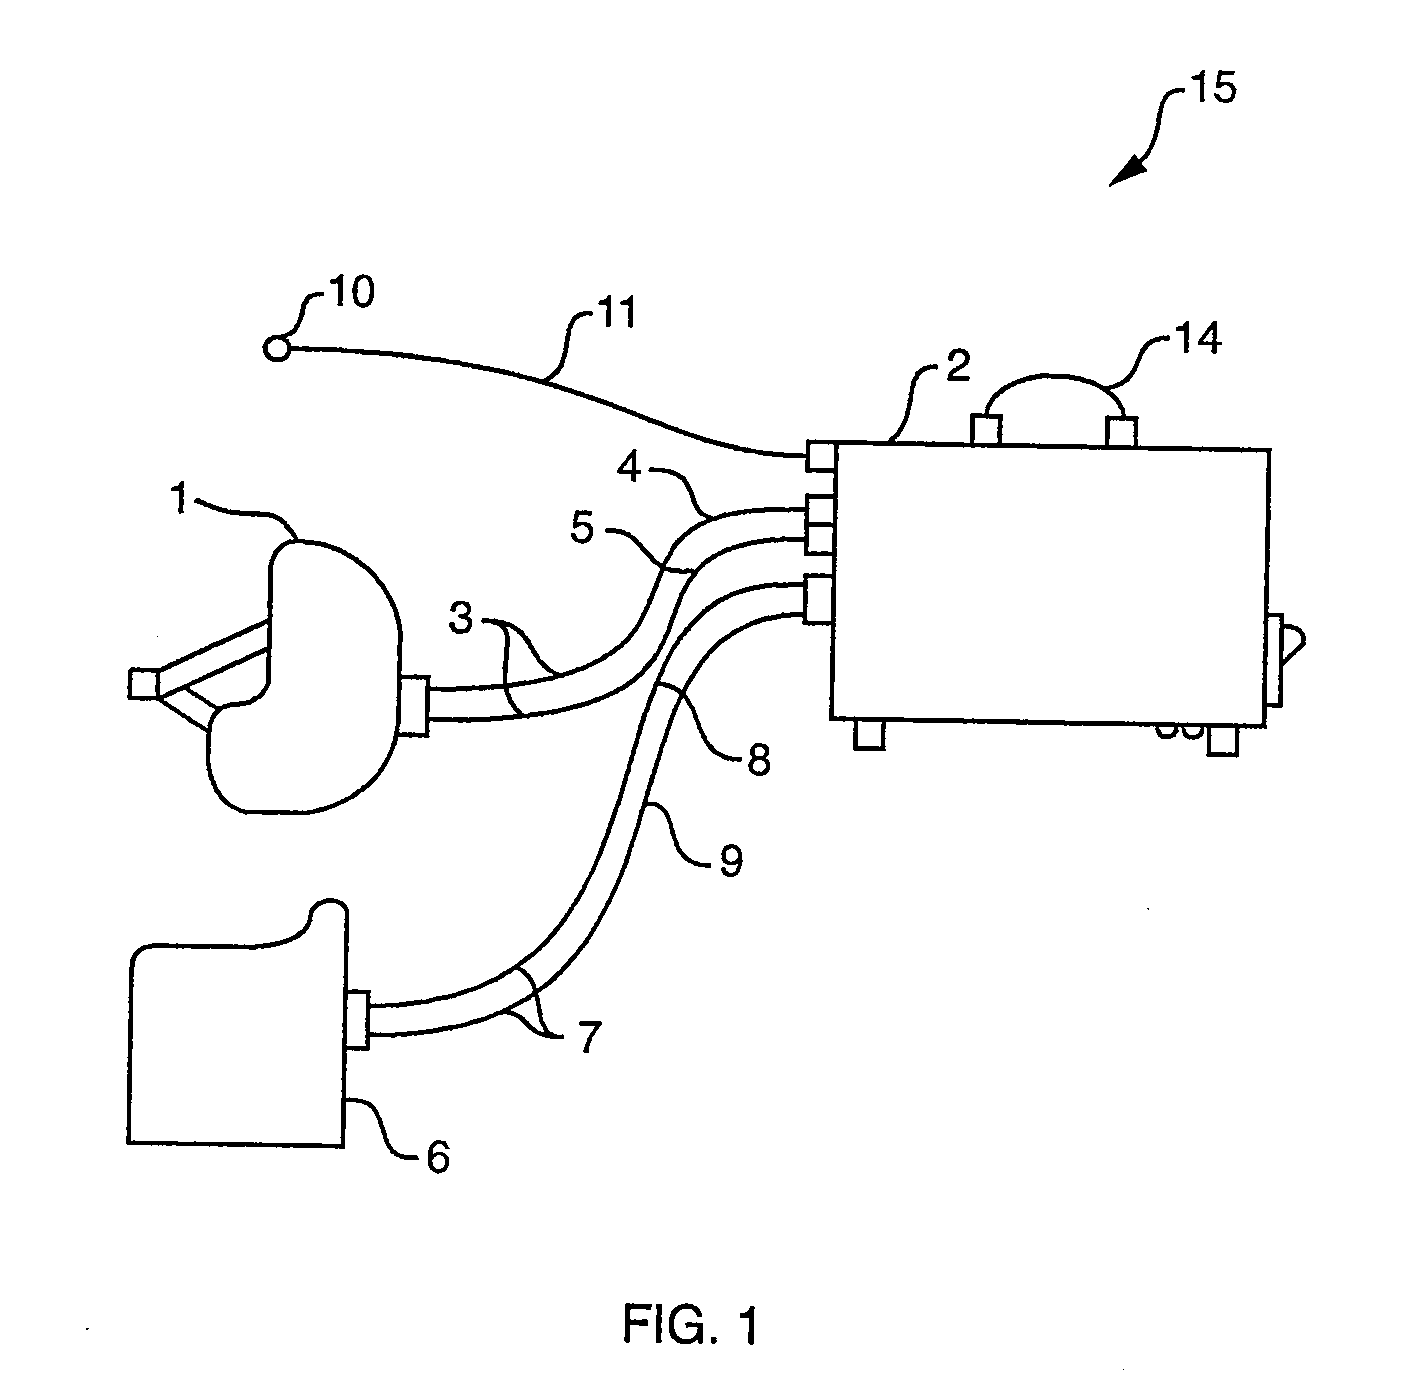 Methods and Apparatus for Thermal Regulation of a Body